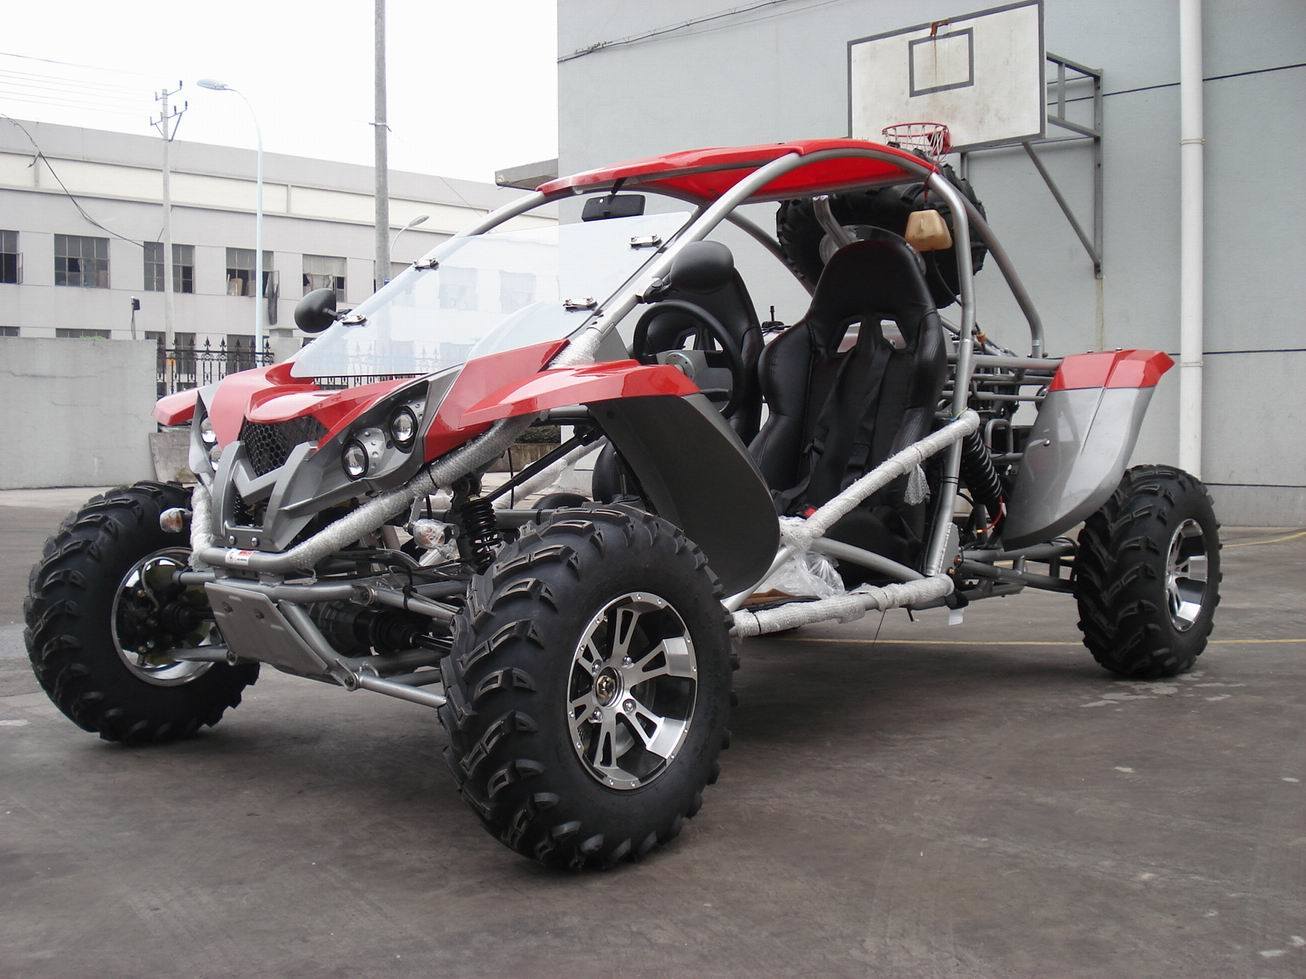 Find Complete Details about Buggy 500CC EFI 4x4 (RLG1-500DZ) from Buggy,Dun...